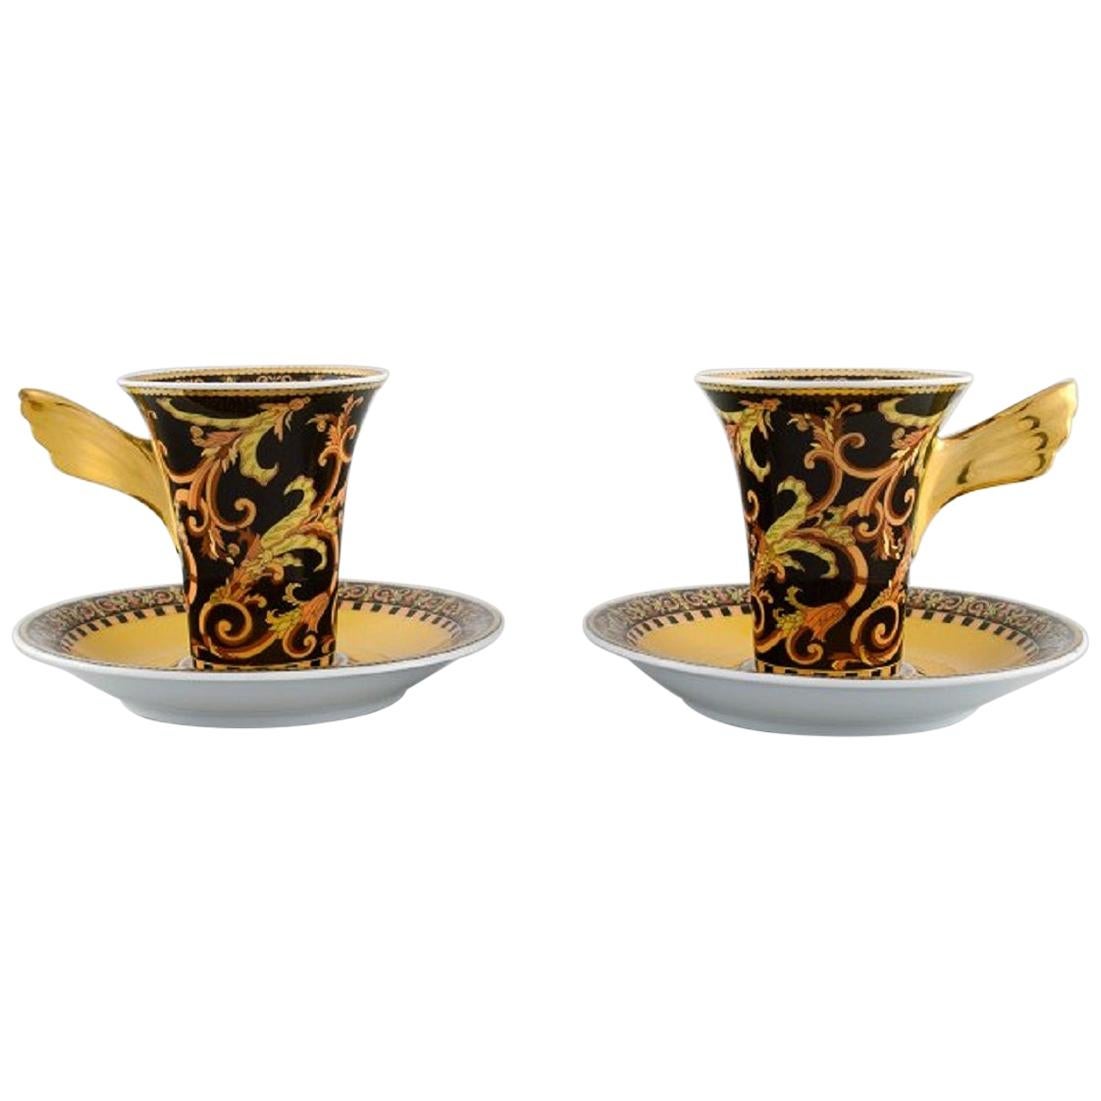 Gianni Versace for Rosenthal, Two Barocco Coffee Cups with Saucers in Porcelain